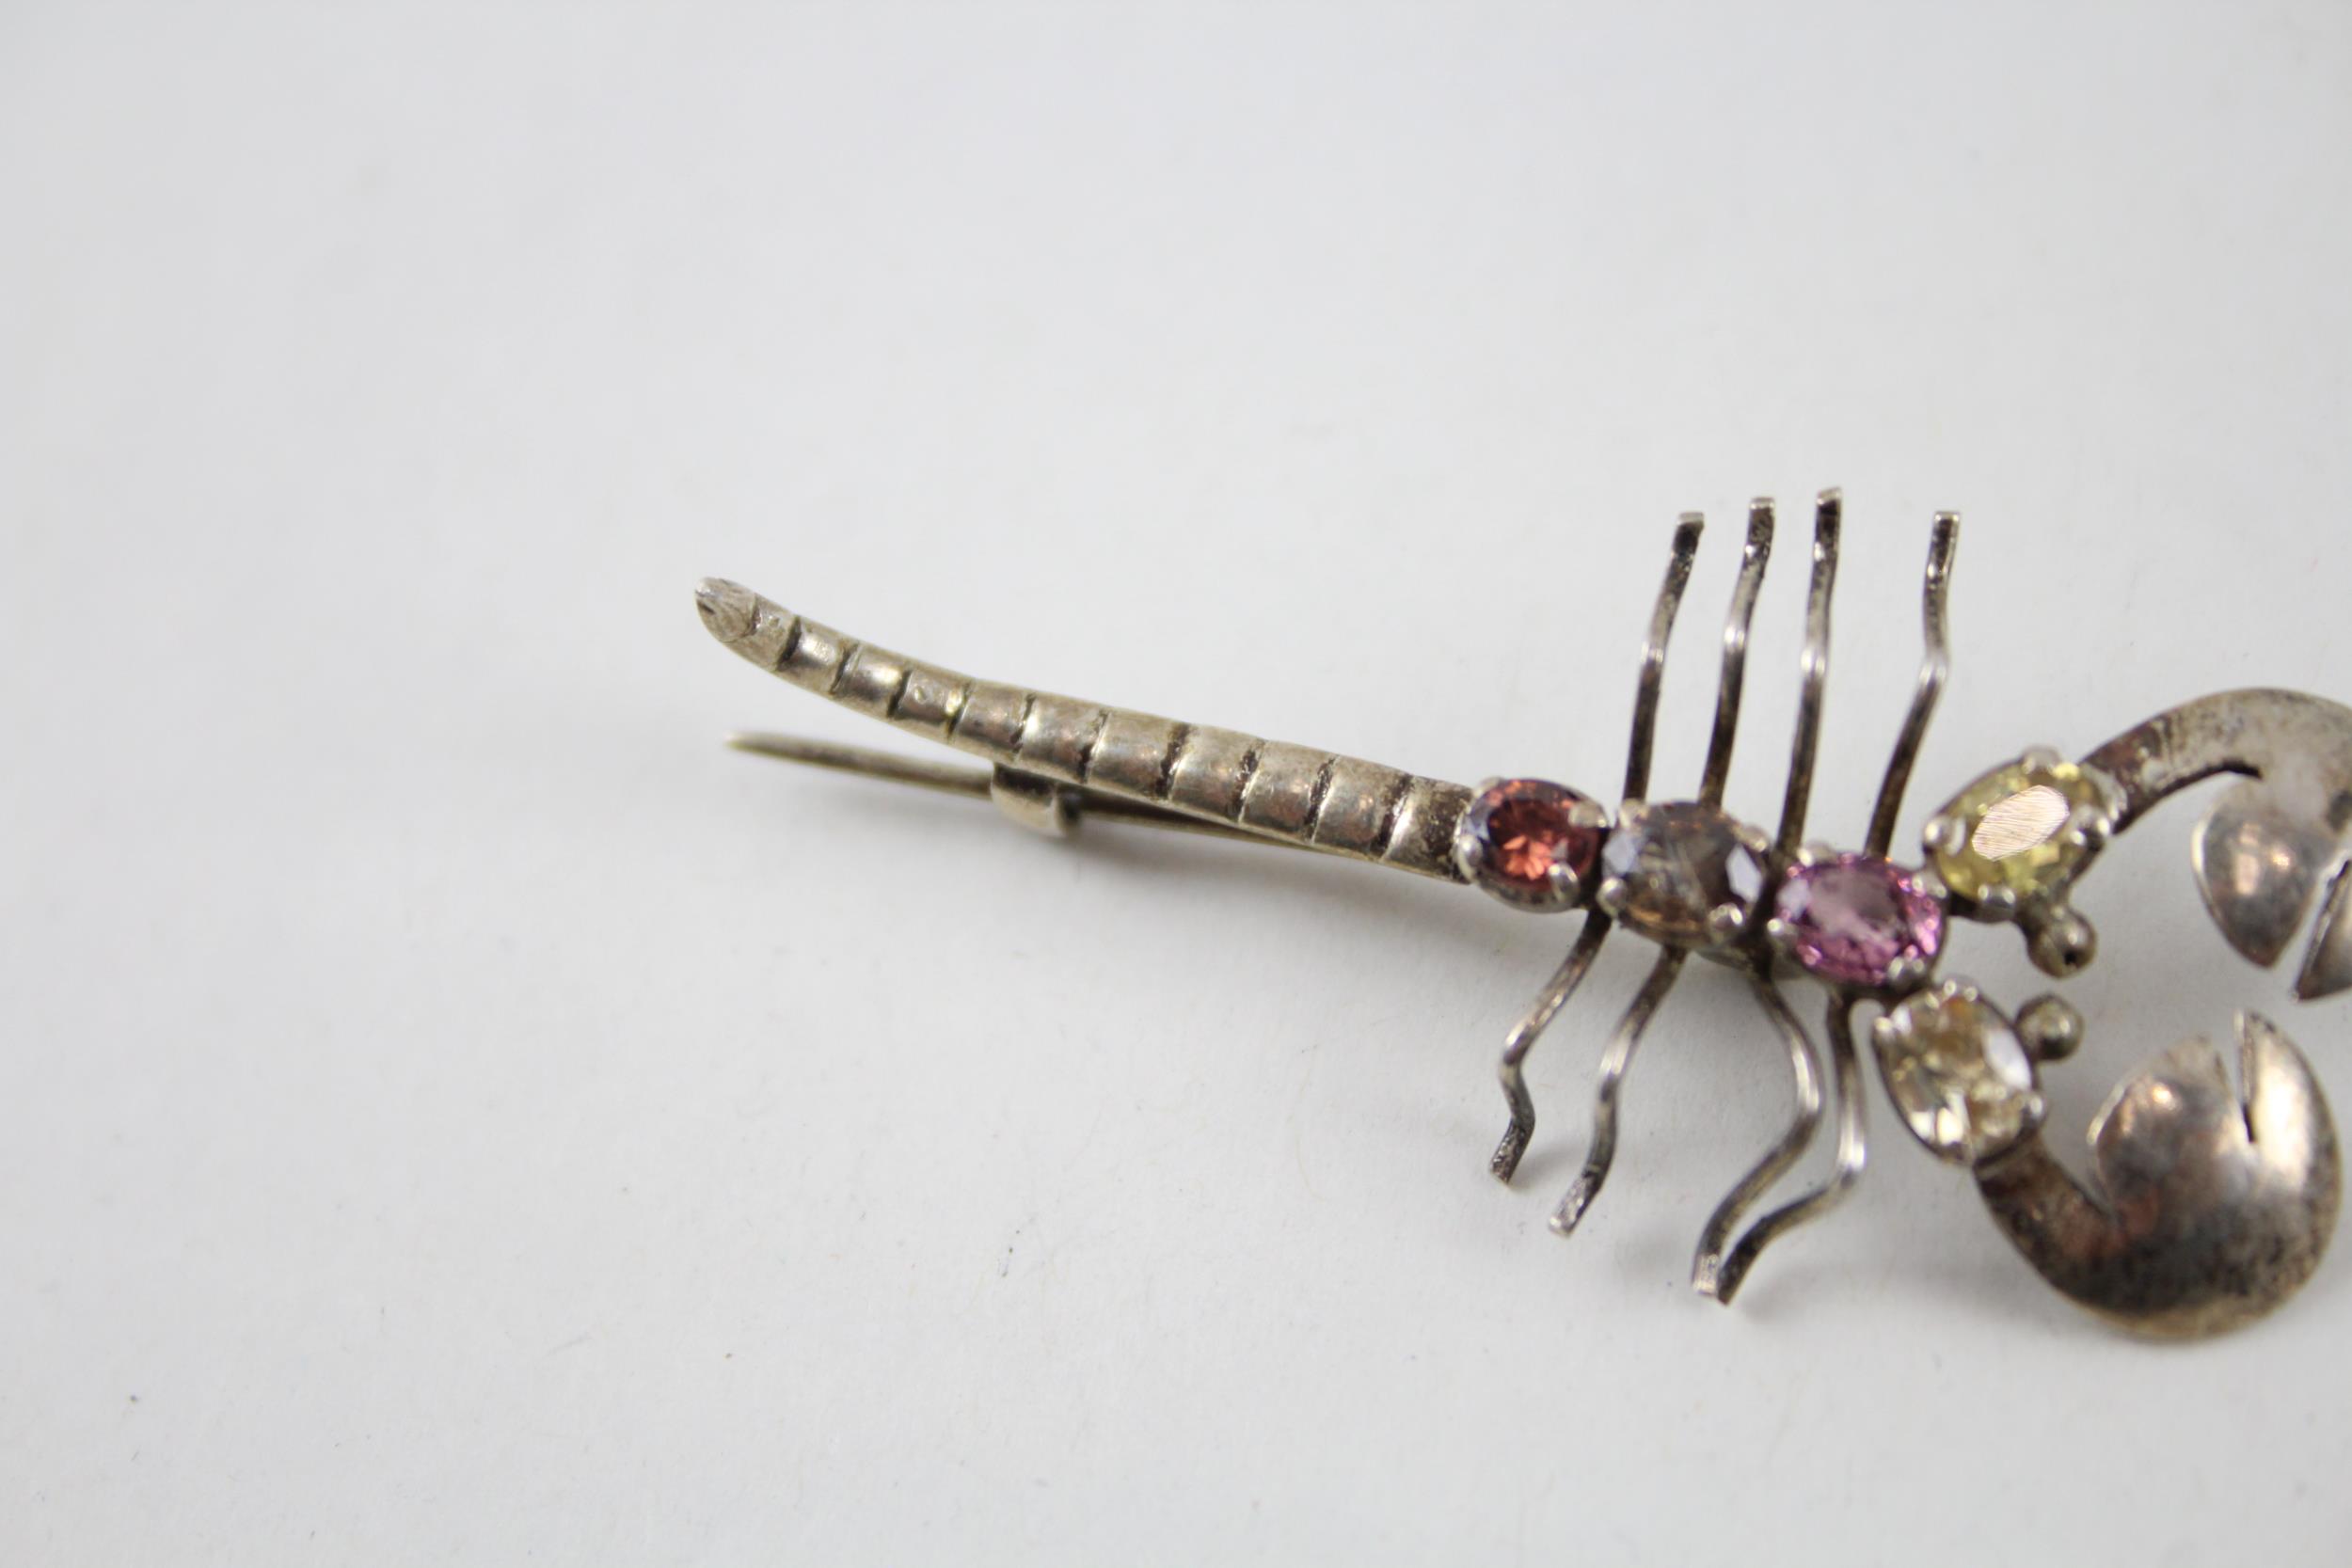 Silver 1930s scorpion brooch set with gemstones (3g) - Image 3 of 6